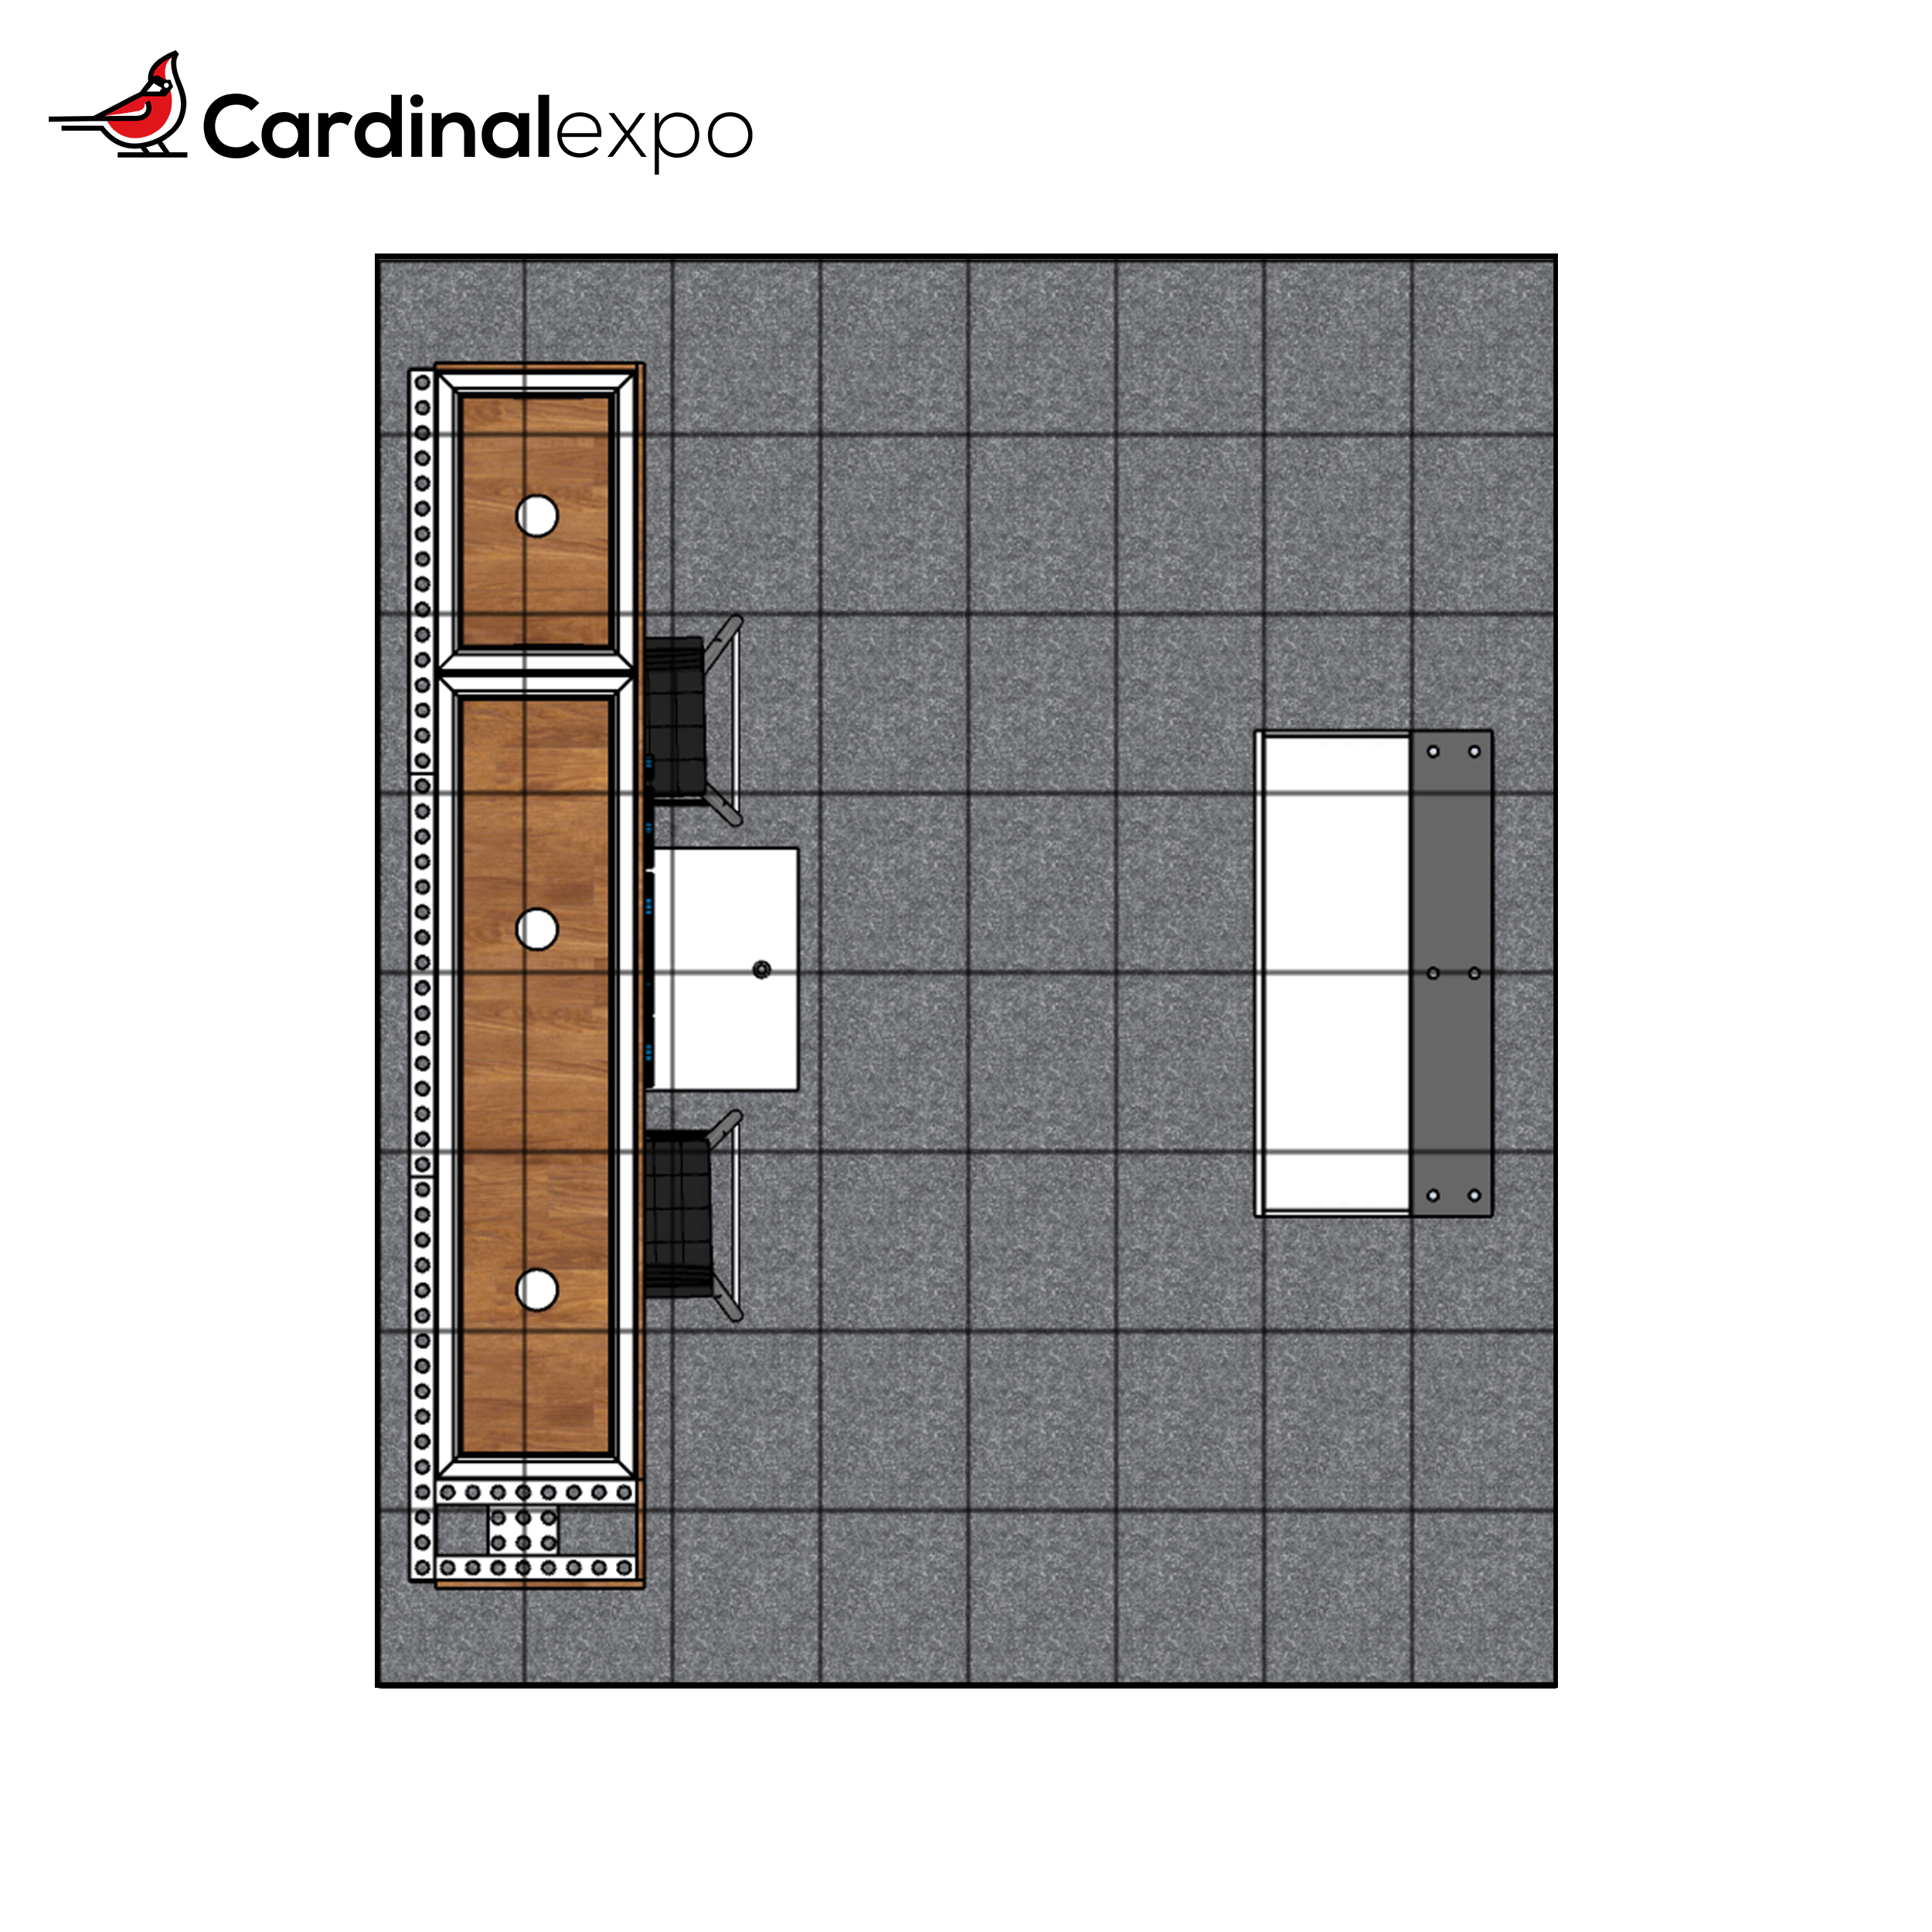 Top-down view of 10 foot by 10 foot booth rental with floorplan overlay.